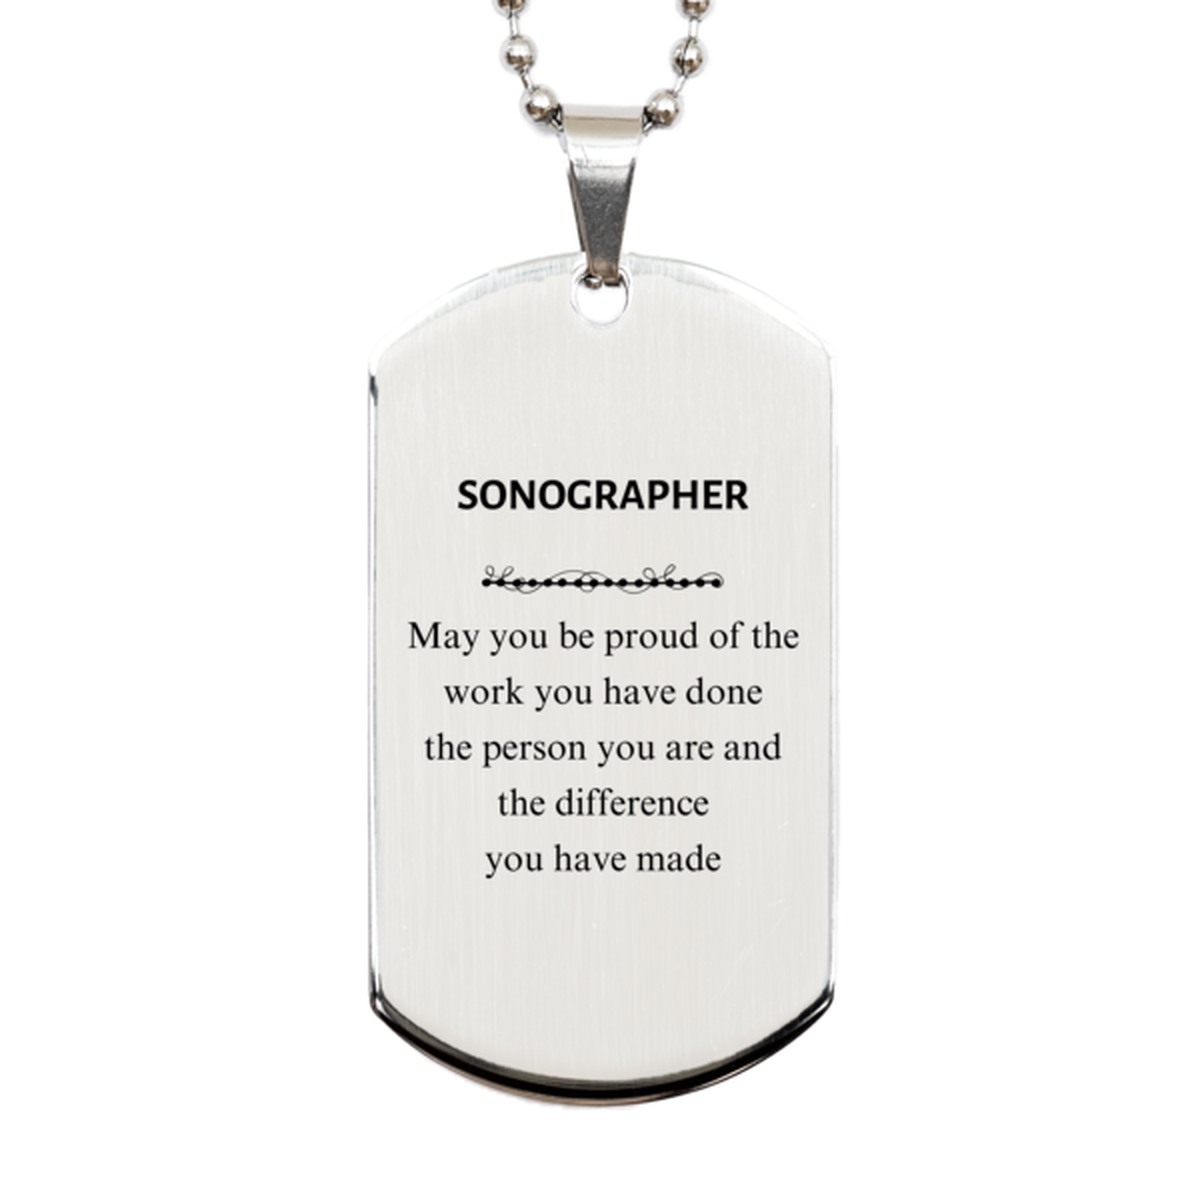 Sonographer May you be proud of the work you have done, Retirement Sonographer Silver Dog Tag for Colleague Appreciation Gifts Amazing for Sonographer